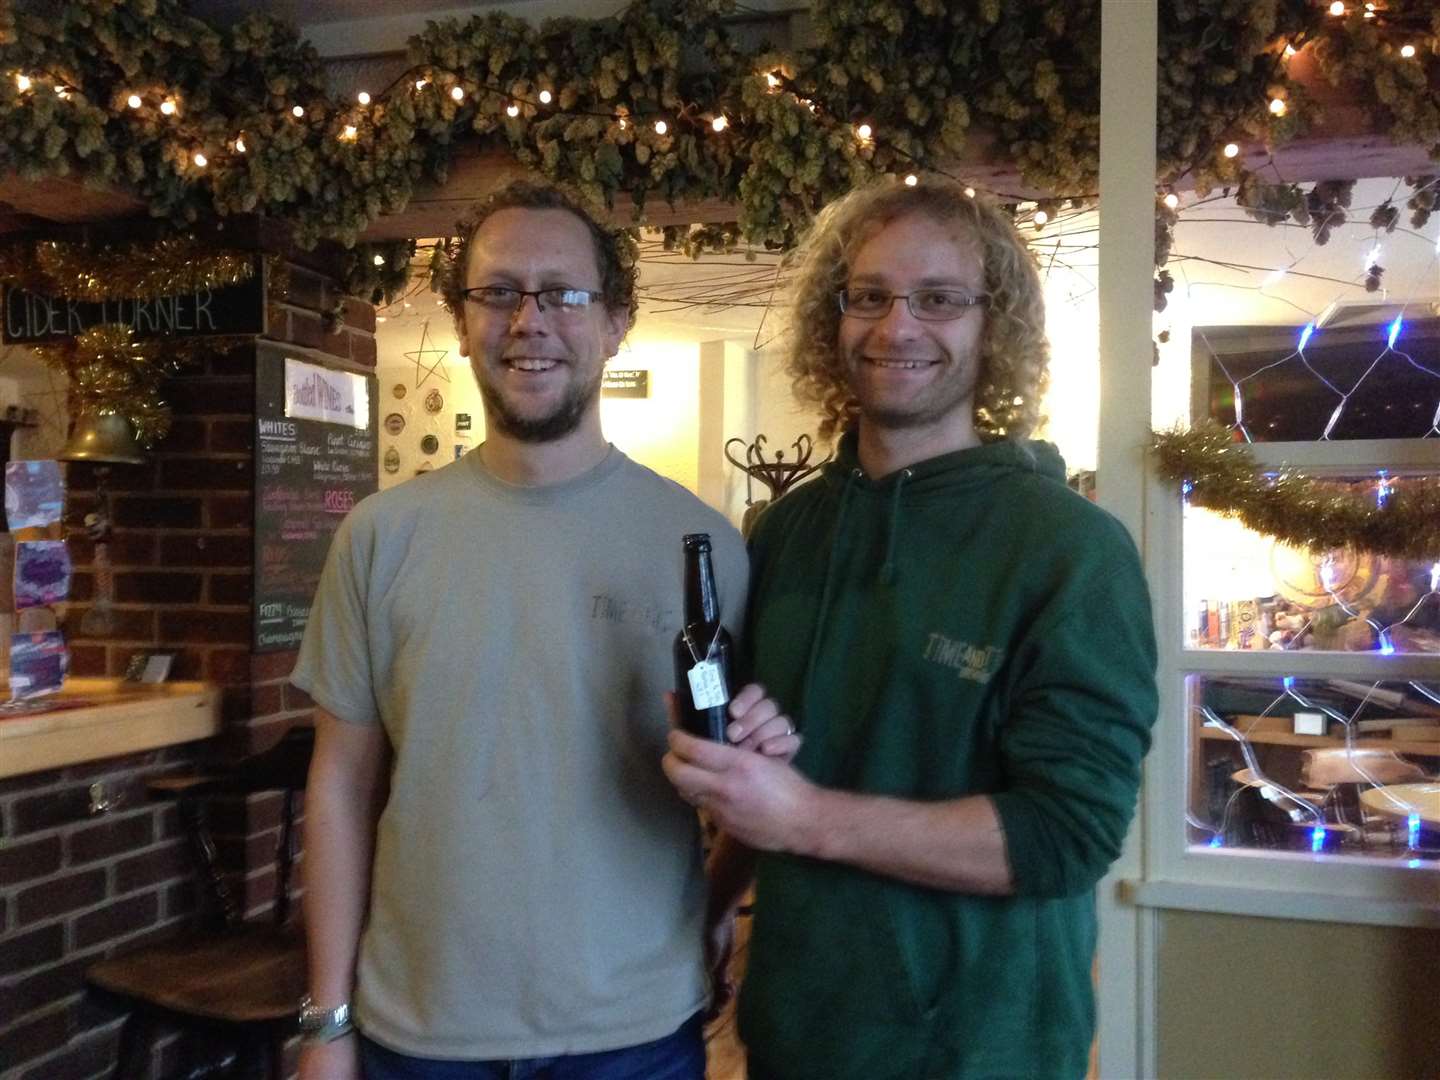 Chris Barnes of the Berry pub has had a beer named after him - Barnes on Fire, by Time & Tide brewery. Pictured with head brewer Sam Weller (right)